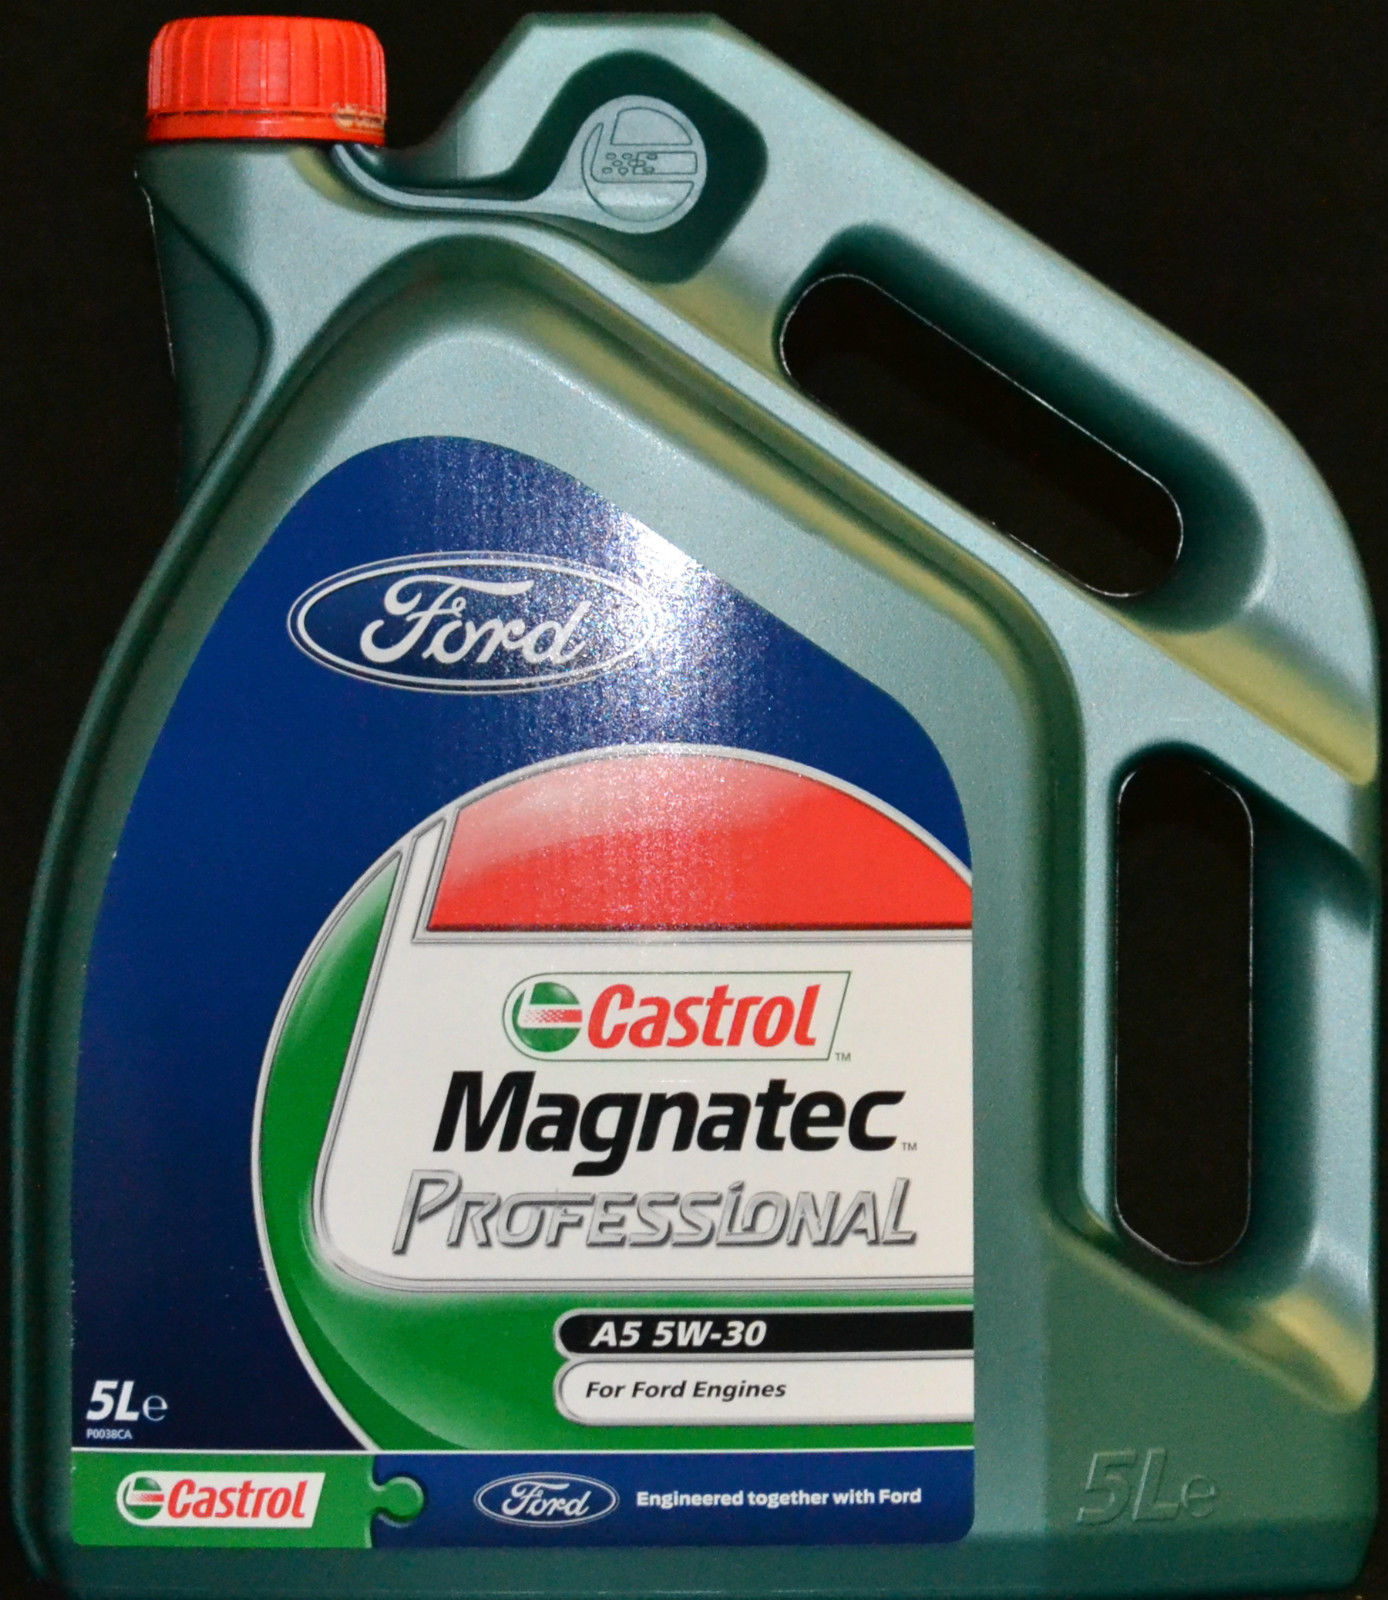 Масло ford ecoboost. Castrol 5w20 Ford. Castrol Magnatec professional 5w20 Ford. 5w20 Ford Castrol ECOBOOST. Castrol Ford 5w30.